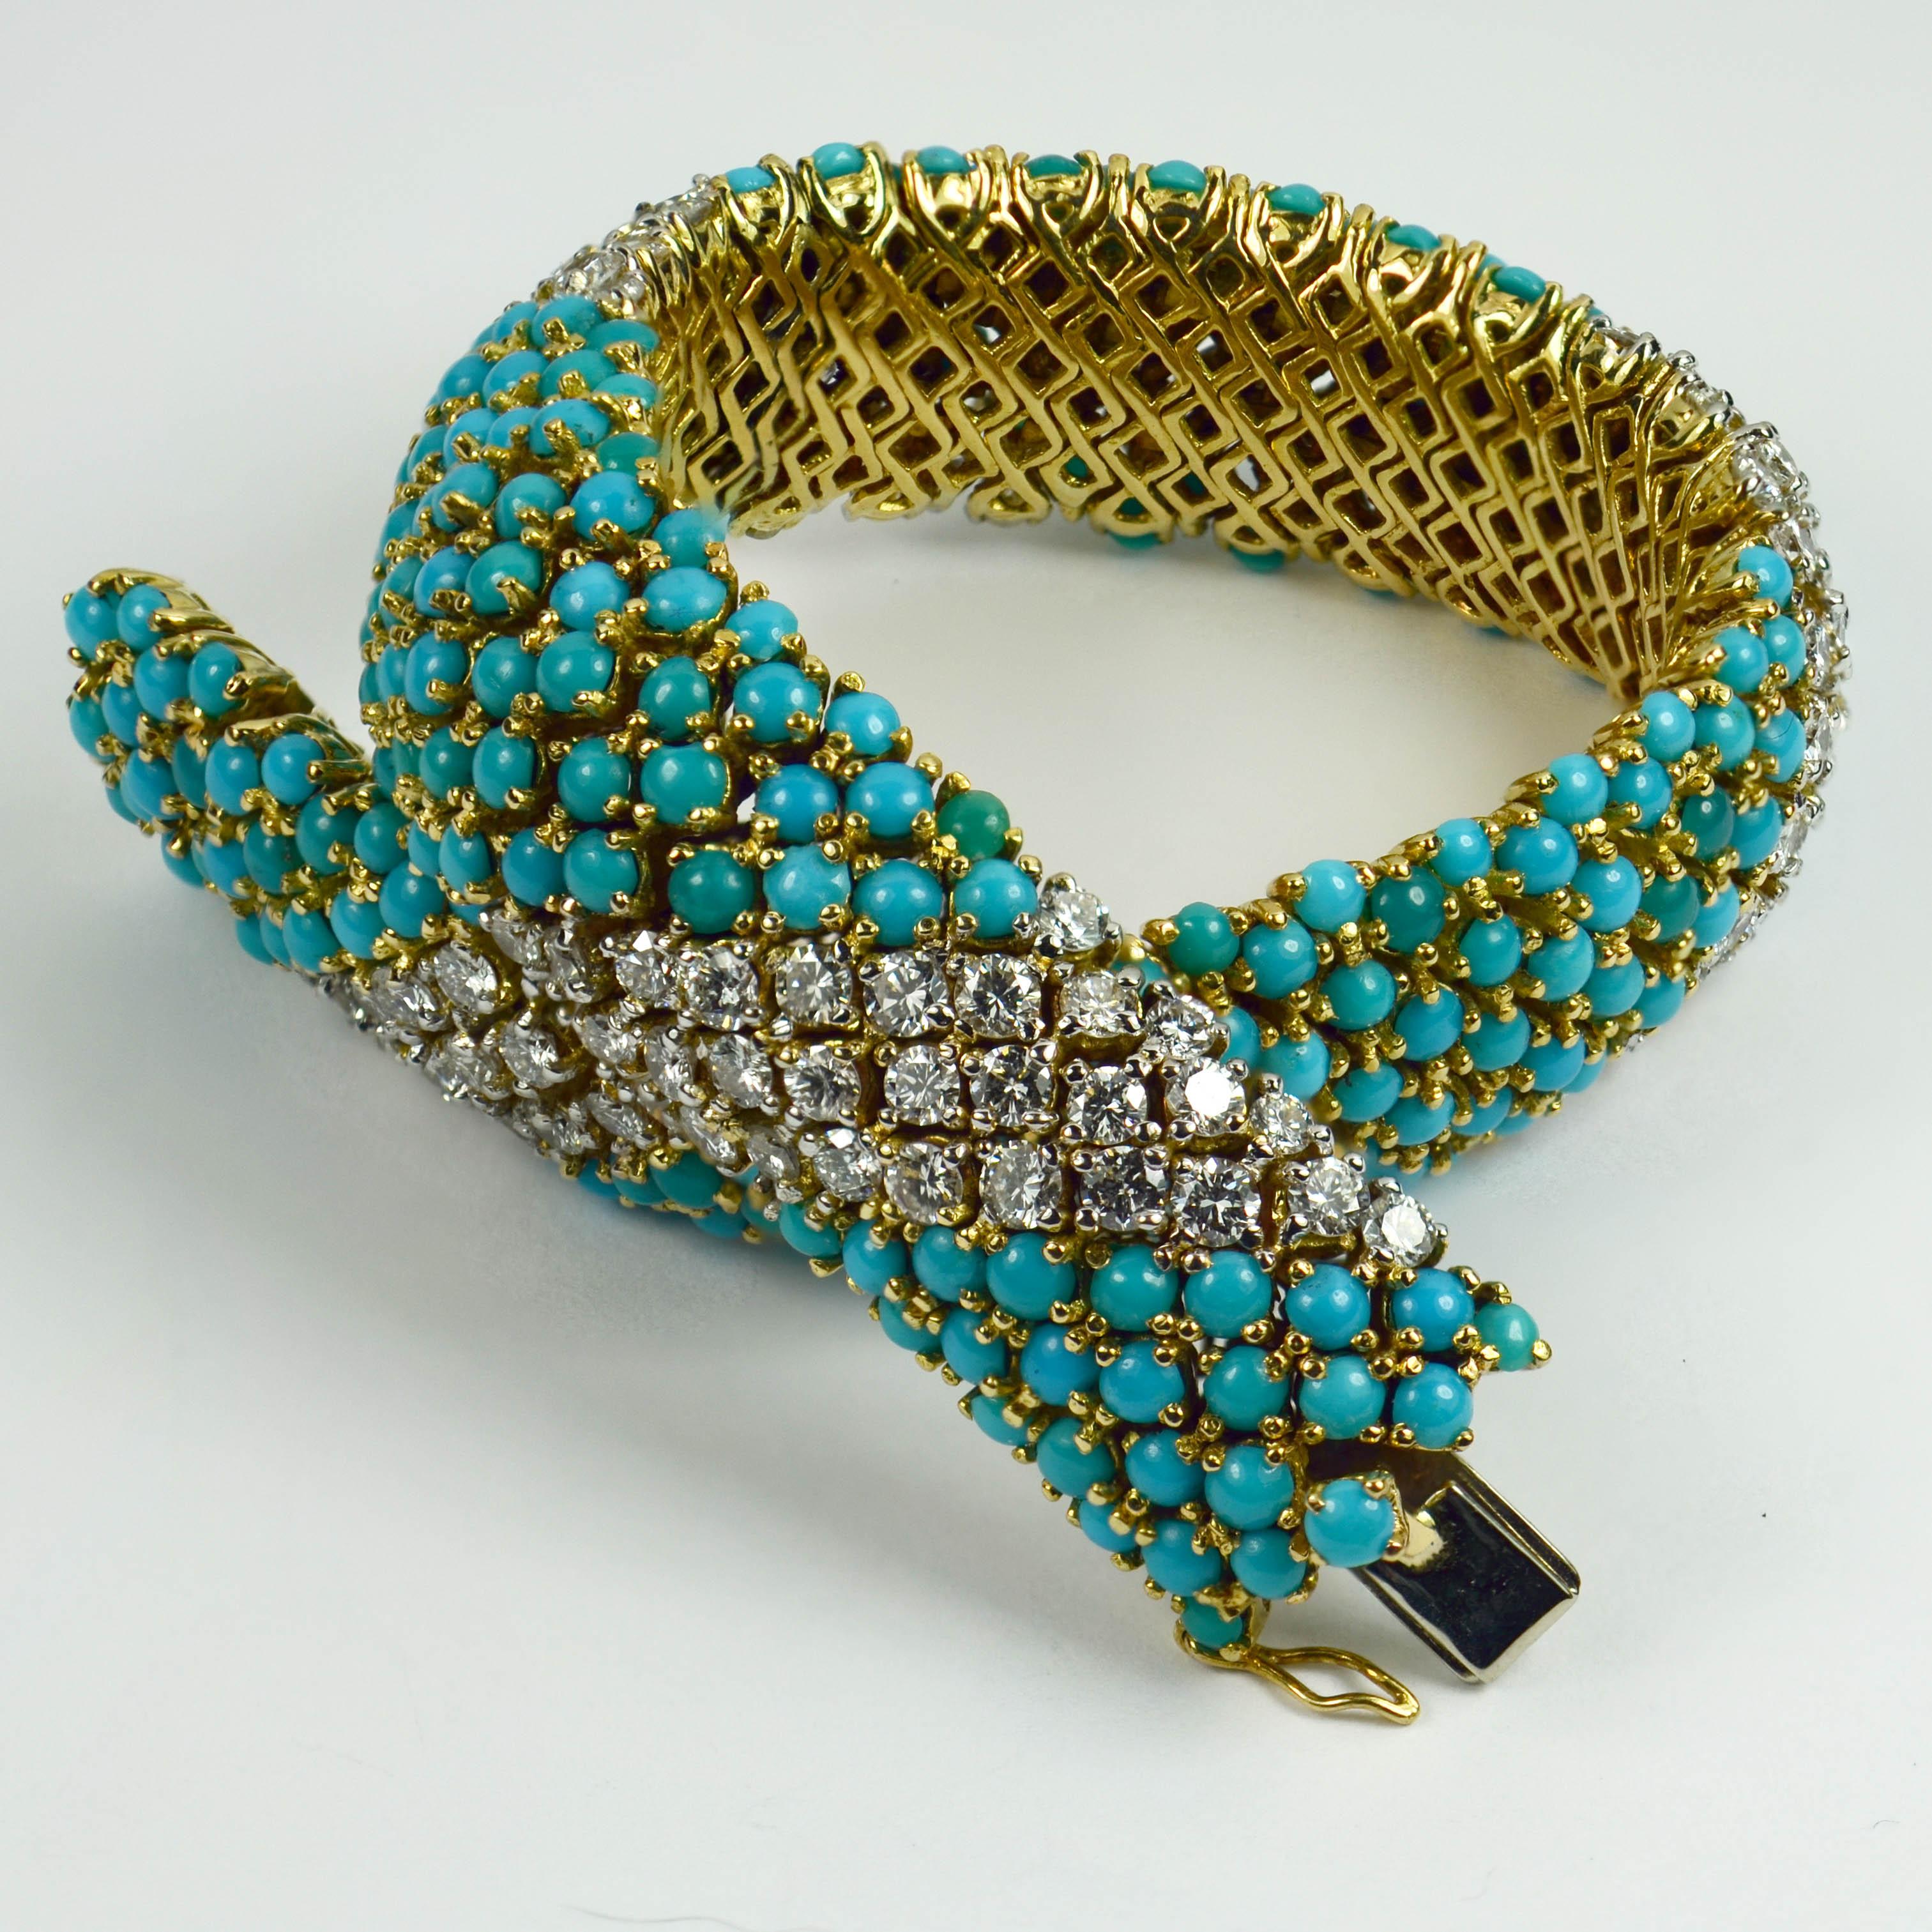 A flexible Italian 18 karat yellow and white gold bracelet set with cabochons of blue turquoise and round brilliant-cut white diamonds in the Pelouse style made famous by Van Cleef et Arpels (VCA) in the 1960s.  

Set with a safety catch for added